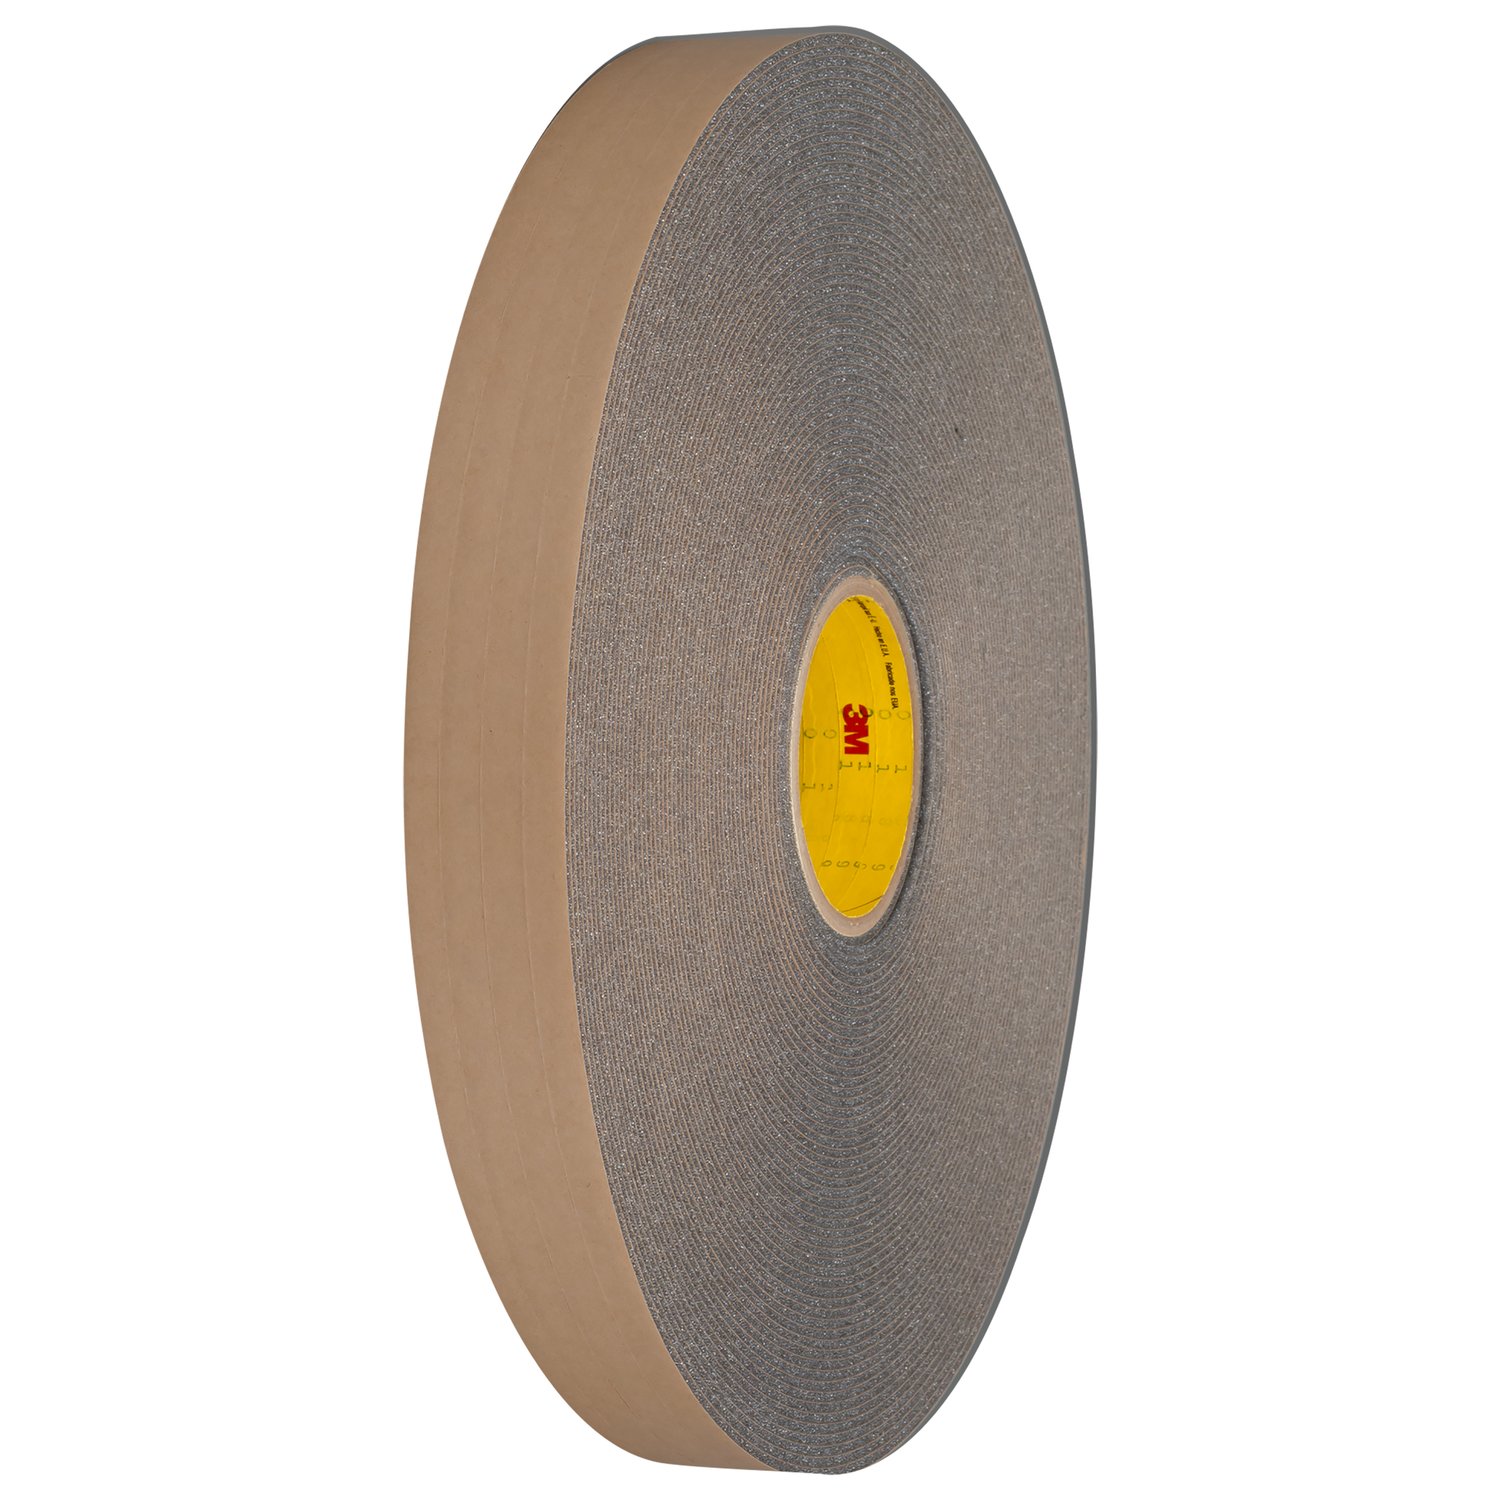 7100012850 - 3M Urethane Foam Tape 4318, Charcoal Gray, 125 mil, Roll, Config